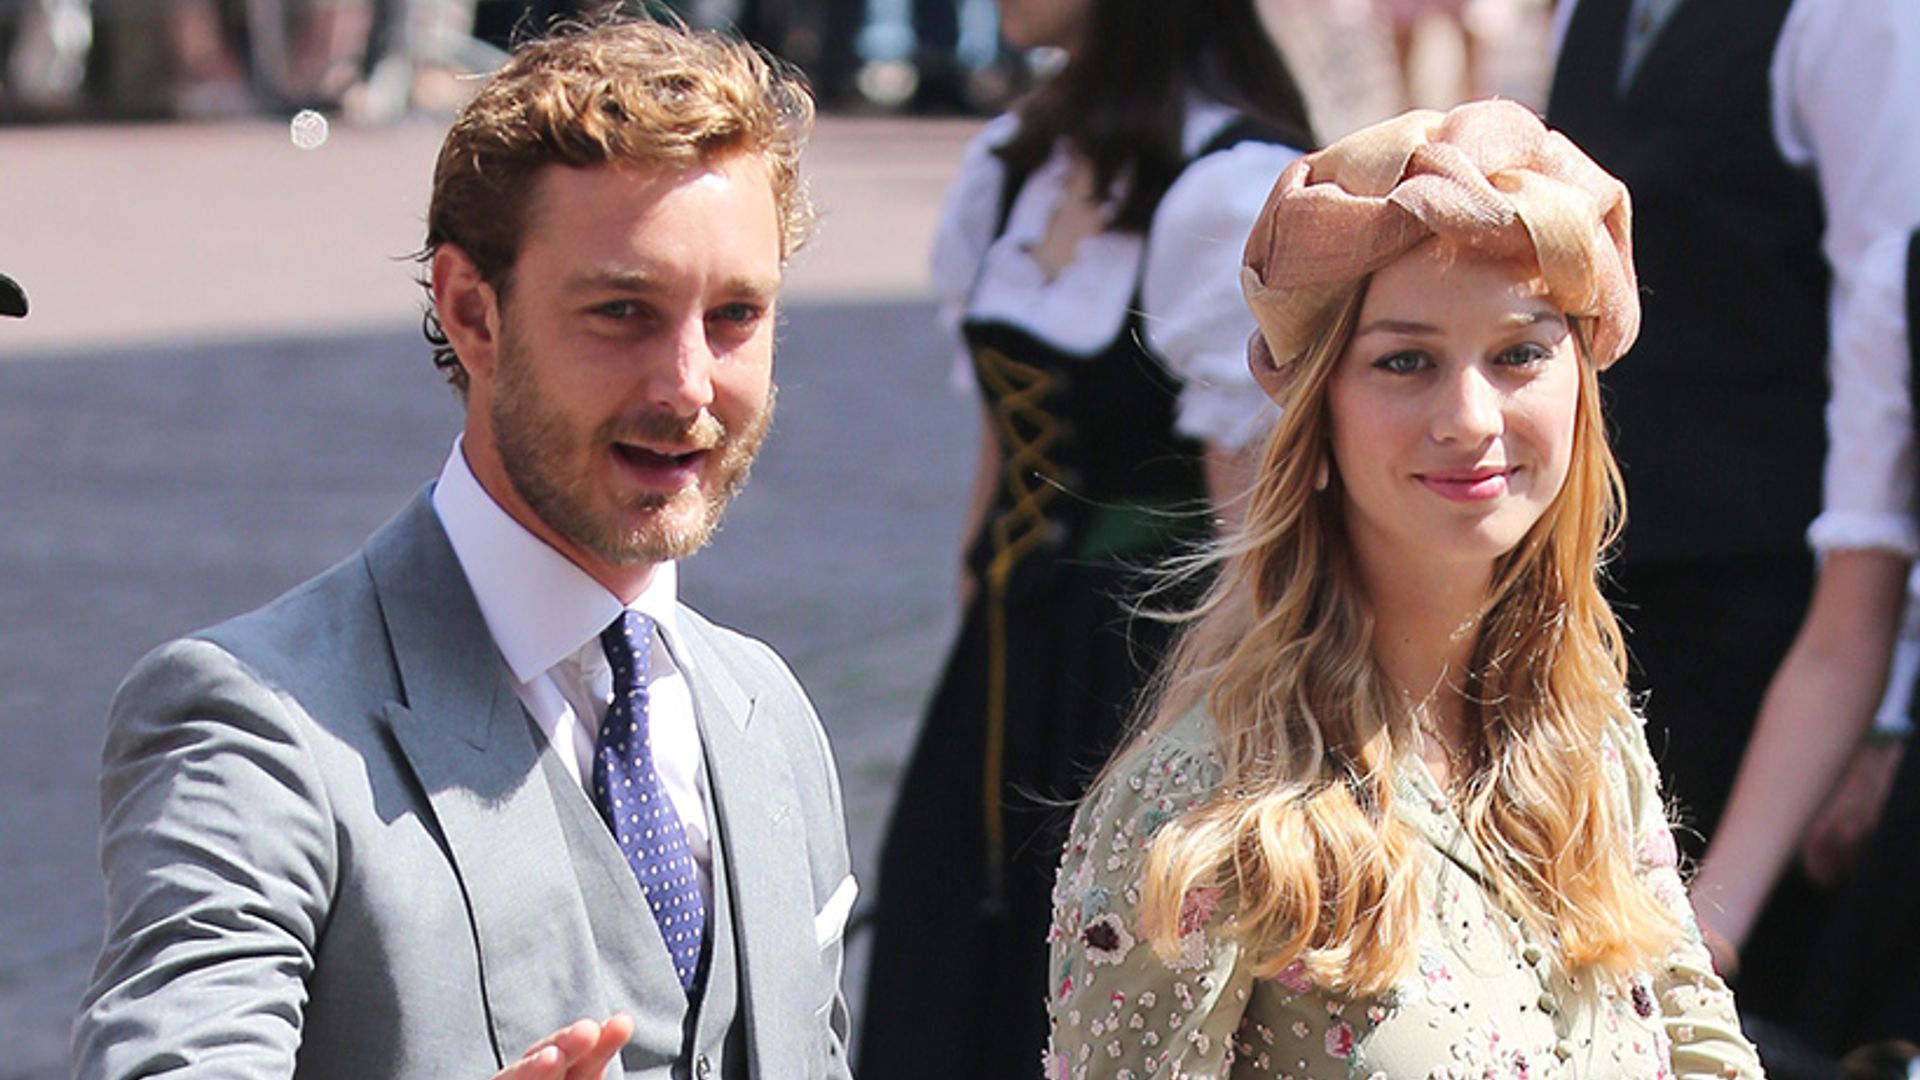 Is new mum Beatrice Borromeo pregnant with second baby?